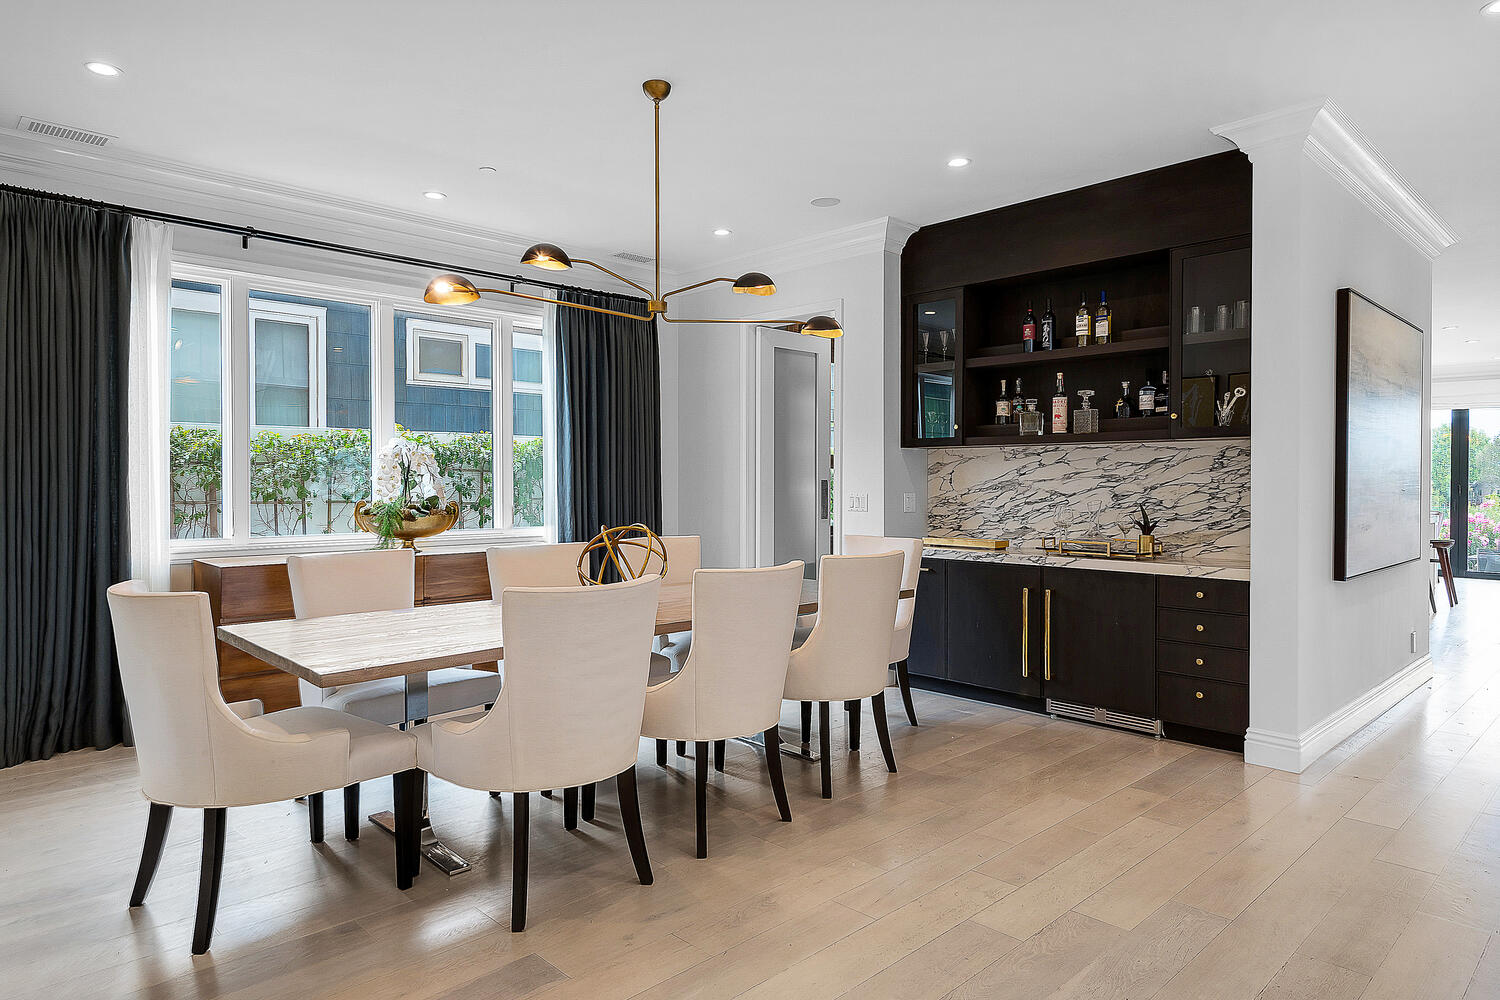 Modern dining area and chandelier. Large wet bar and built-in seating area